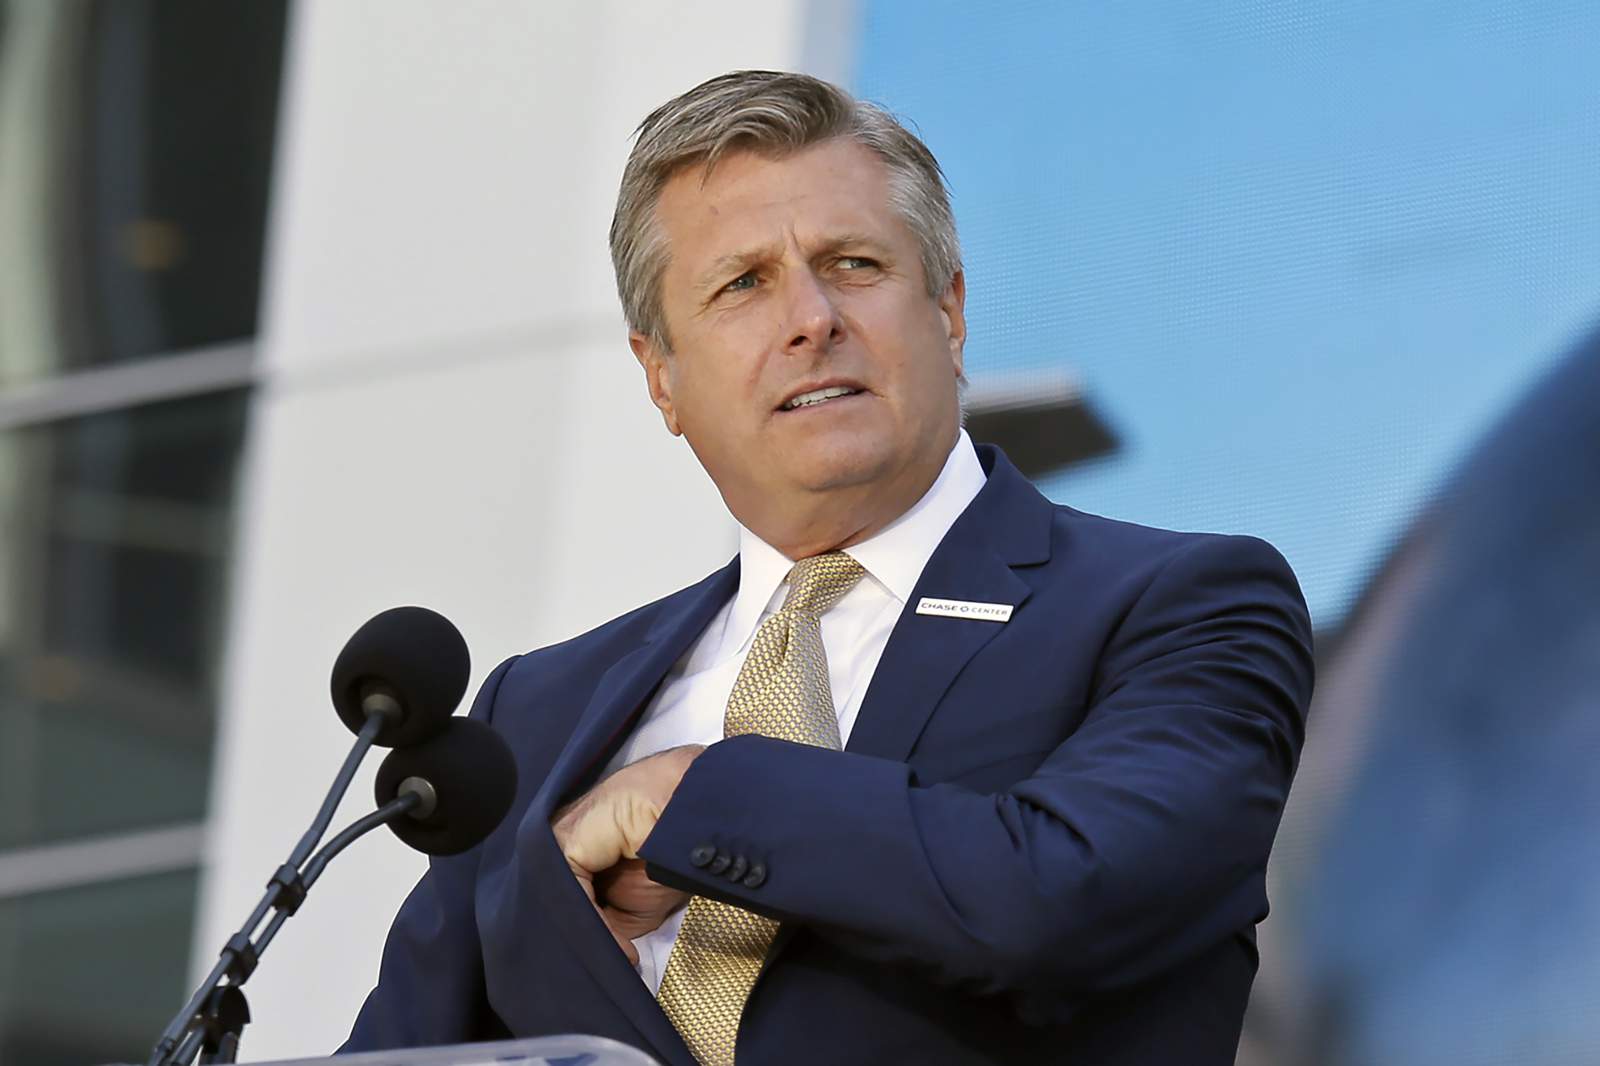 Warriors President Rick Welts to leave after this season